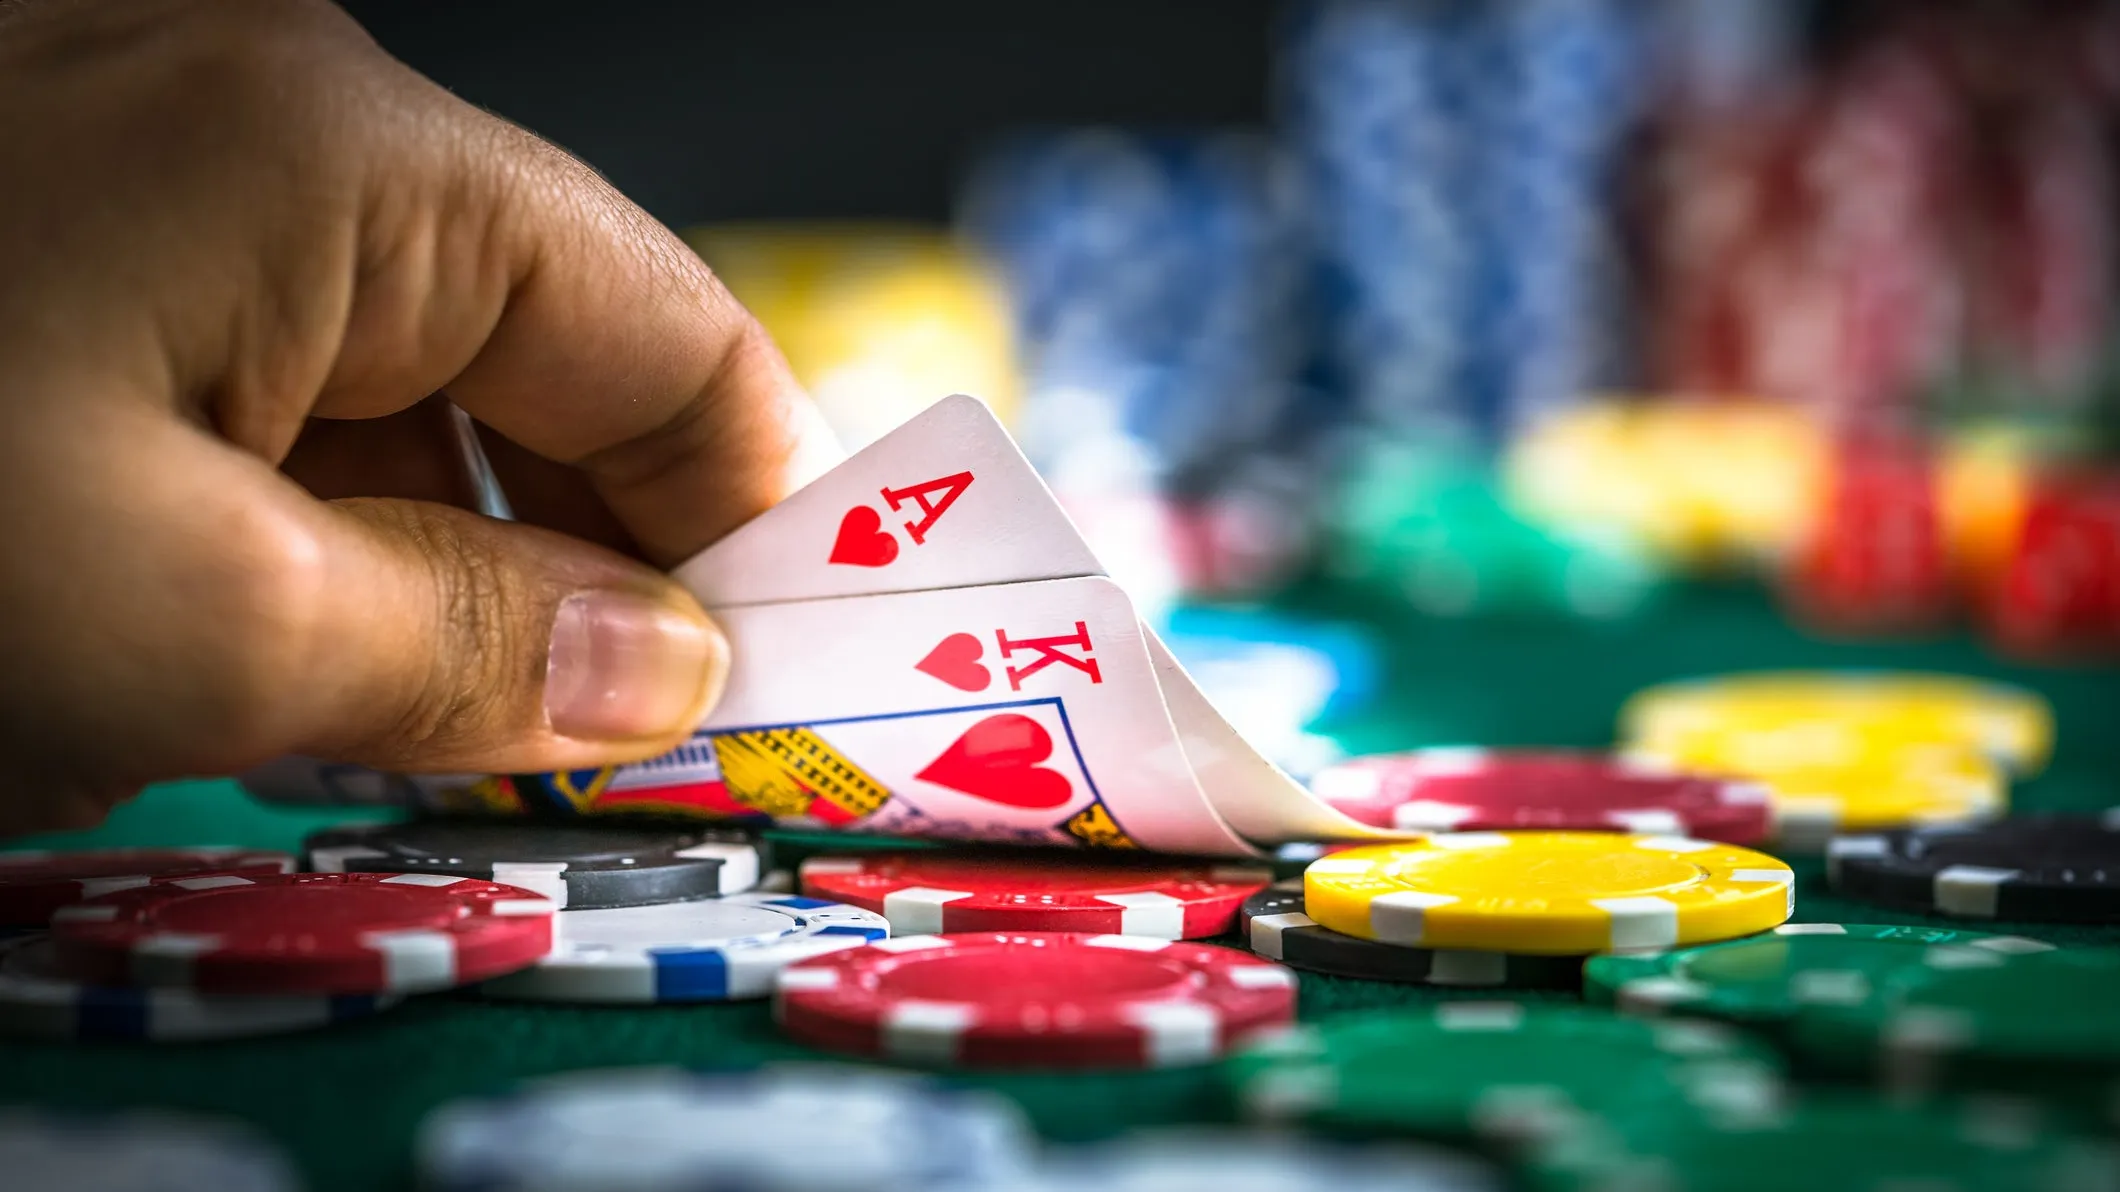 States with Limited or No Legal Gambling